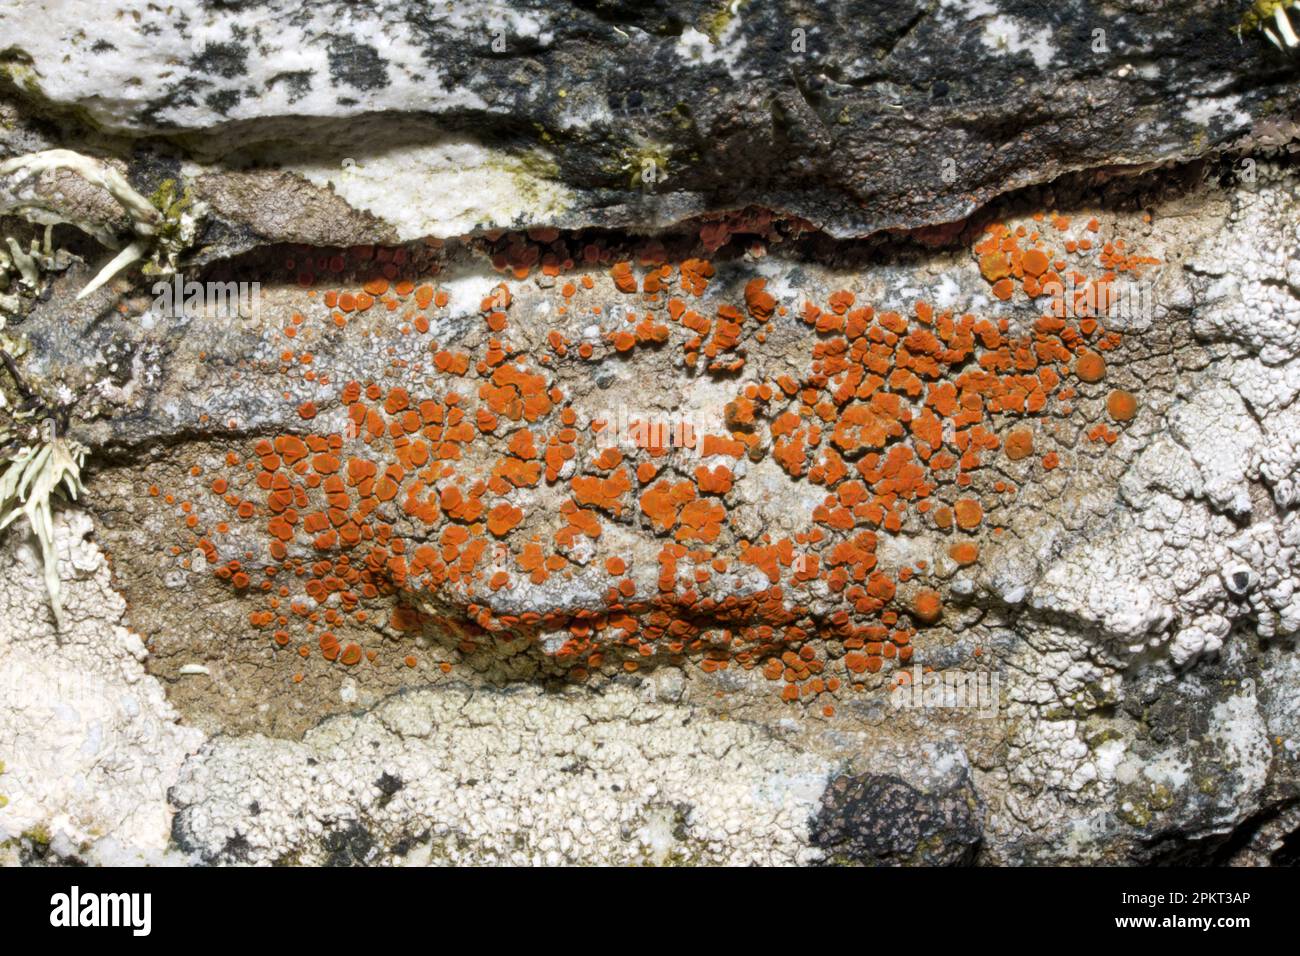 Caloplaca crenularia is a crustose lichen found mostly on coastal rocks. It occurs all around the coast of the UK. Stock Photo